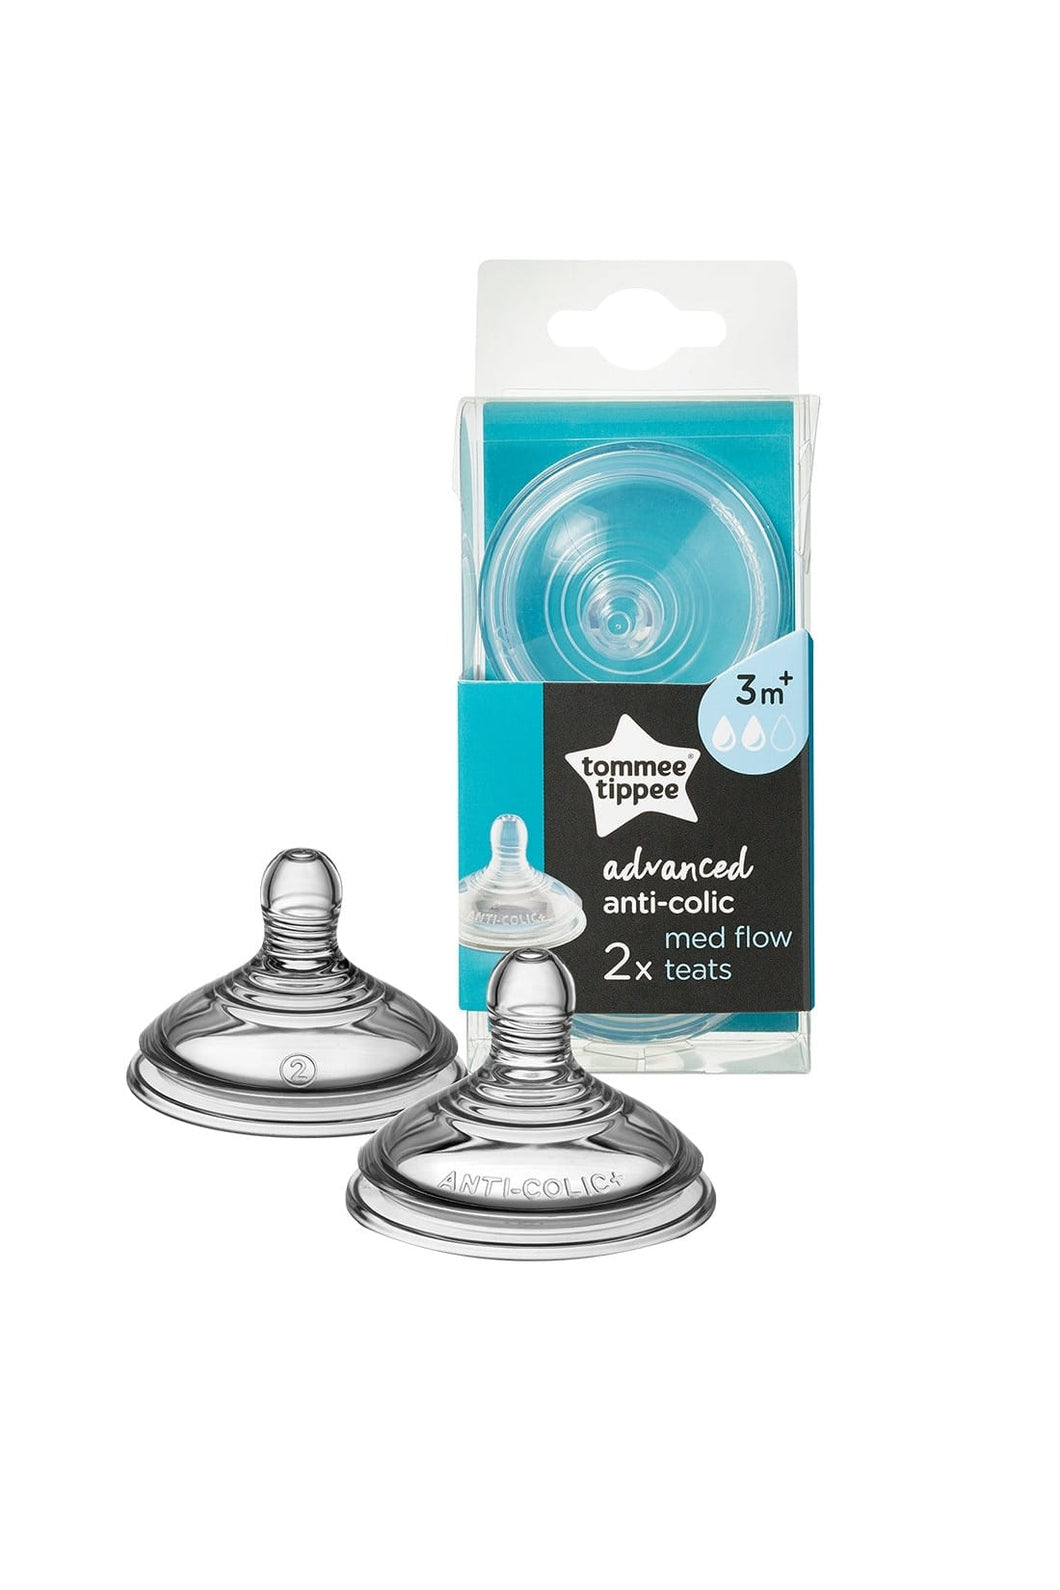 Tommee Tippee Advanced Anti Colic Med Flow Teats 2 Pack